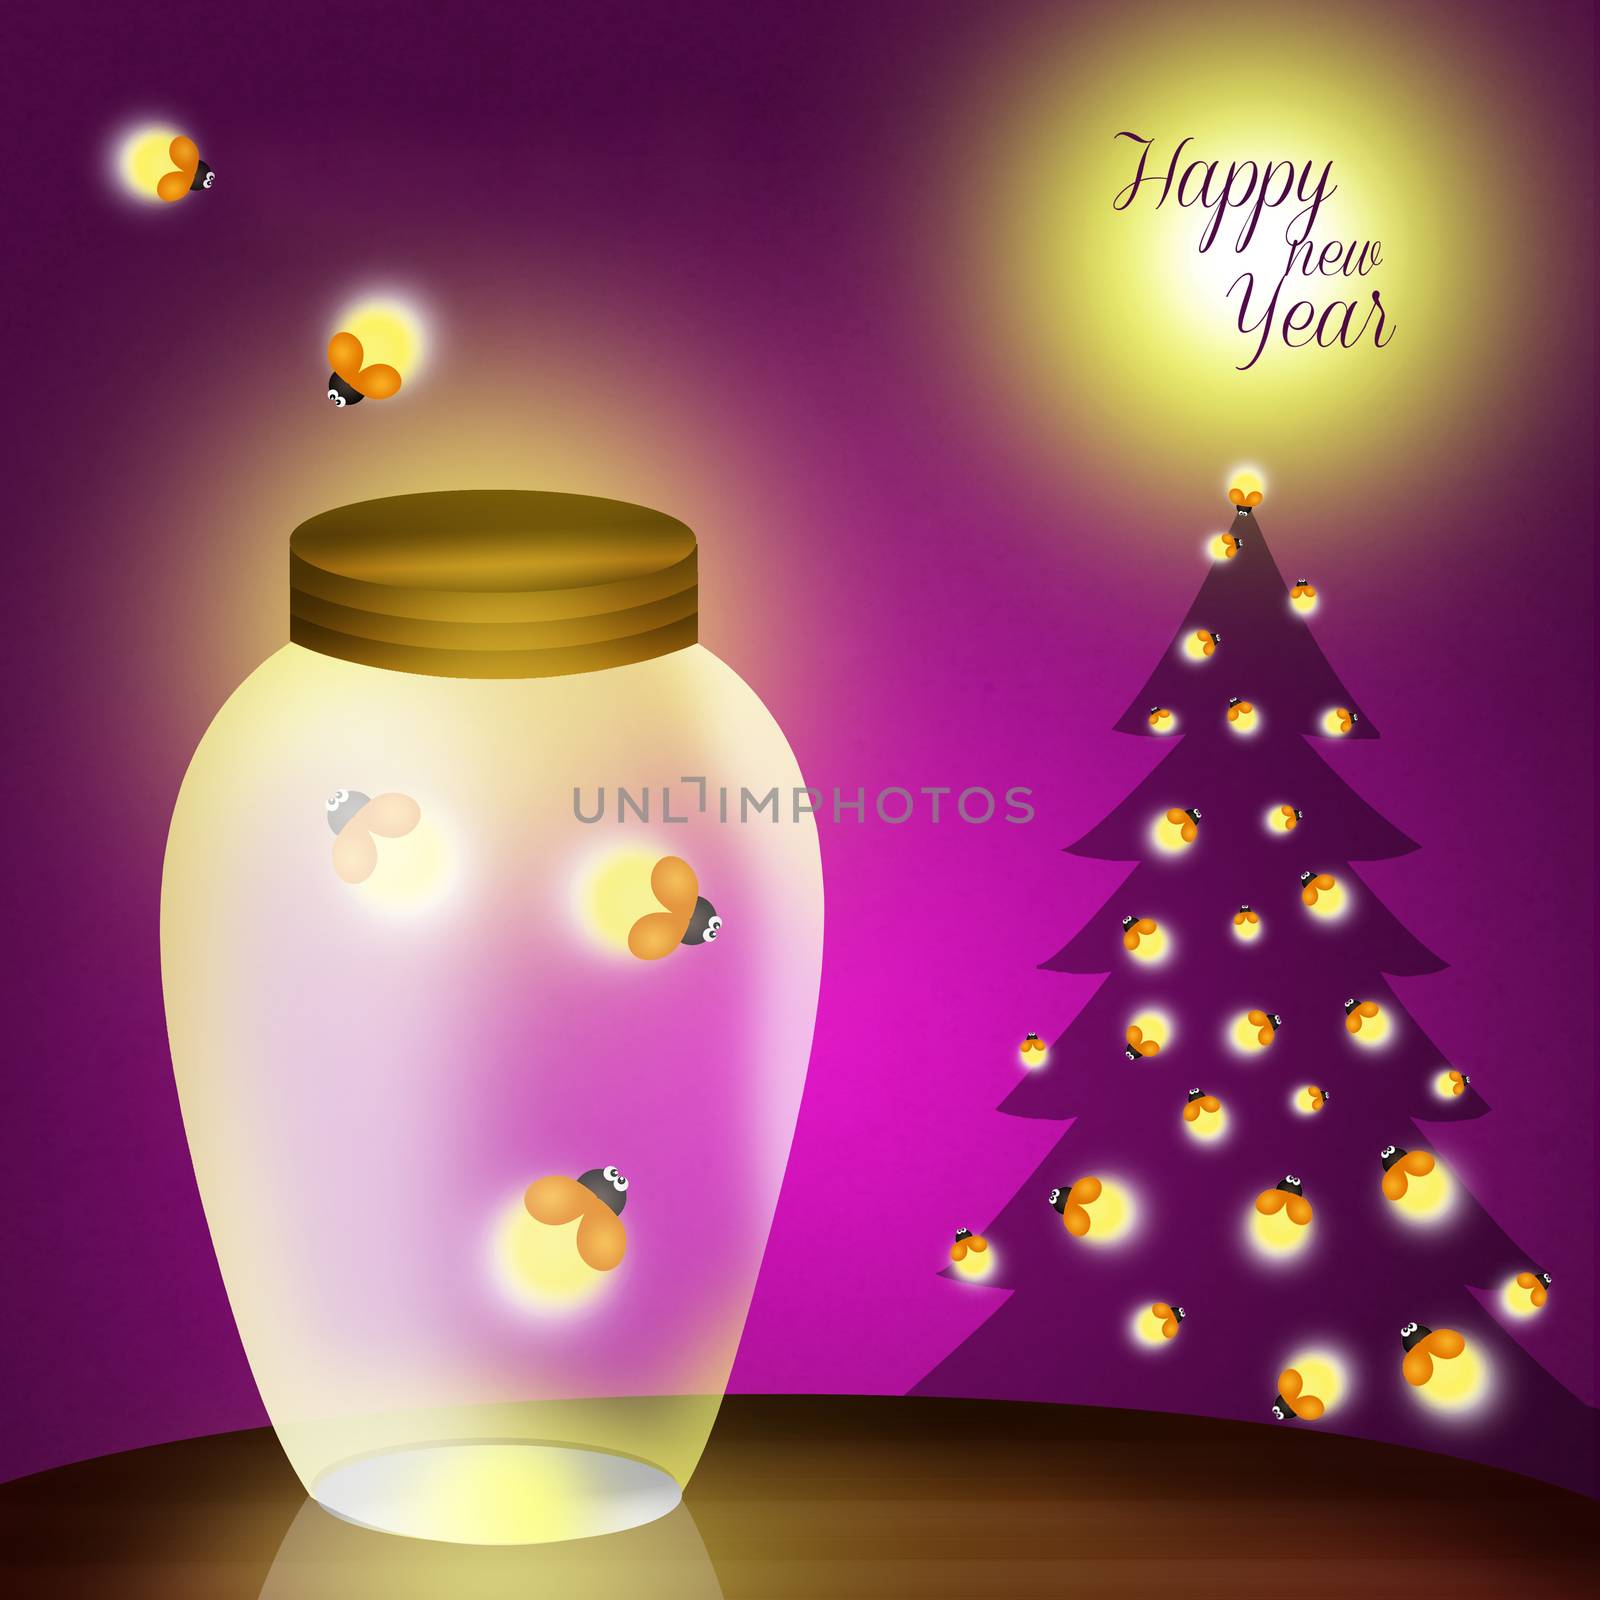 illustration of the New Year